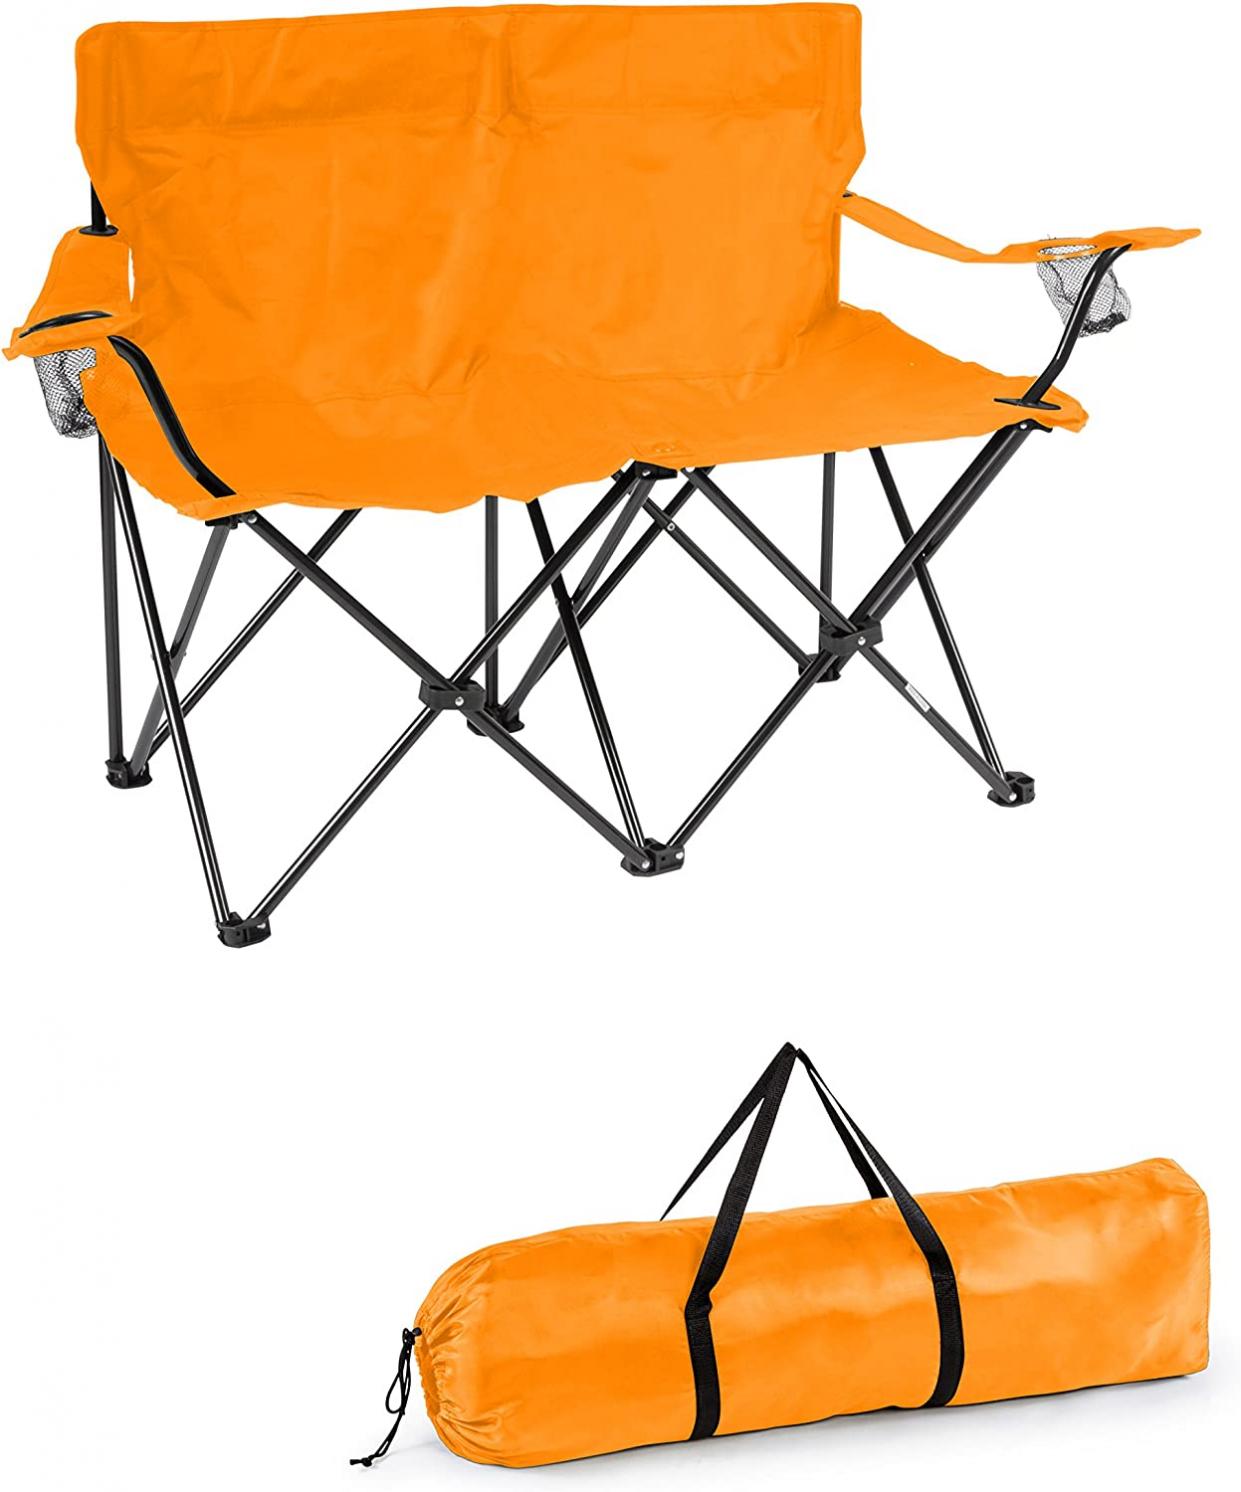 Trademark Innovations Loveseat Style Double Camp Chair, 40" L x 22" W x 31.5" H, Orange